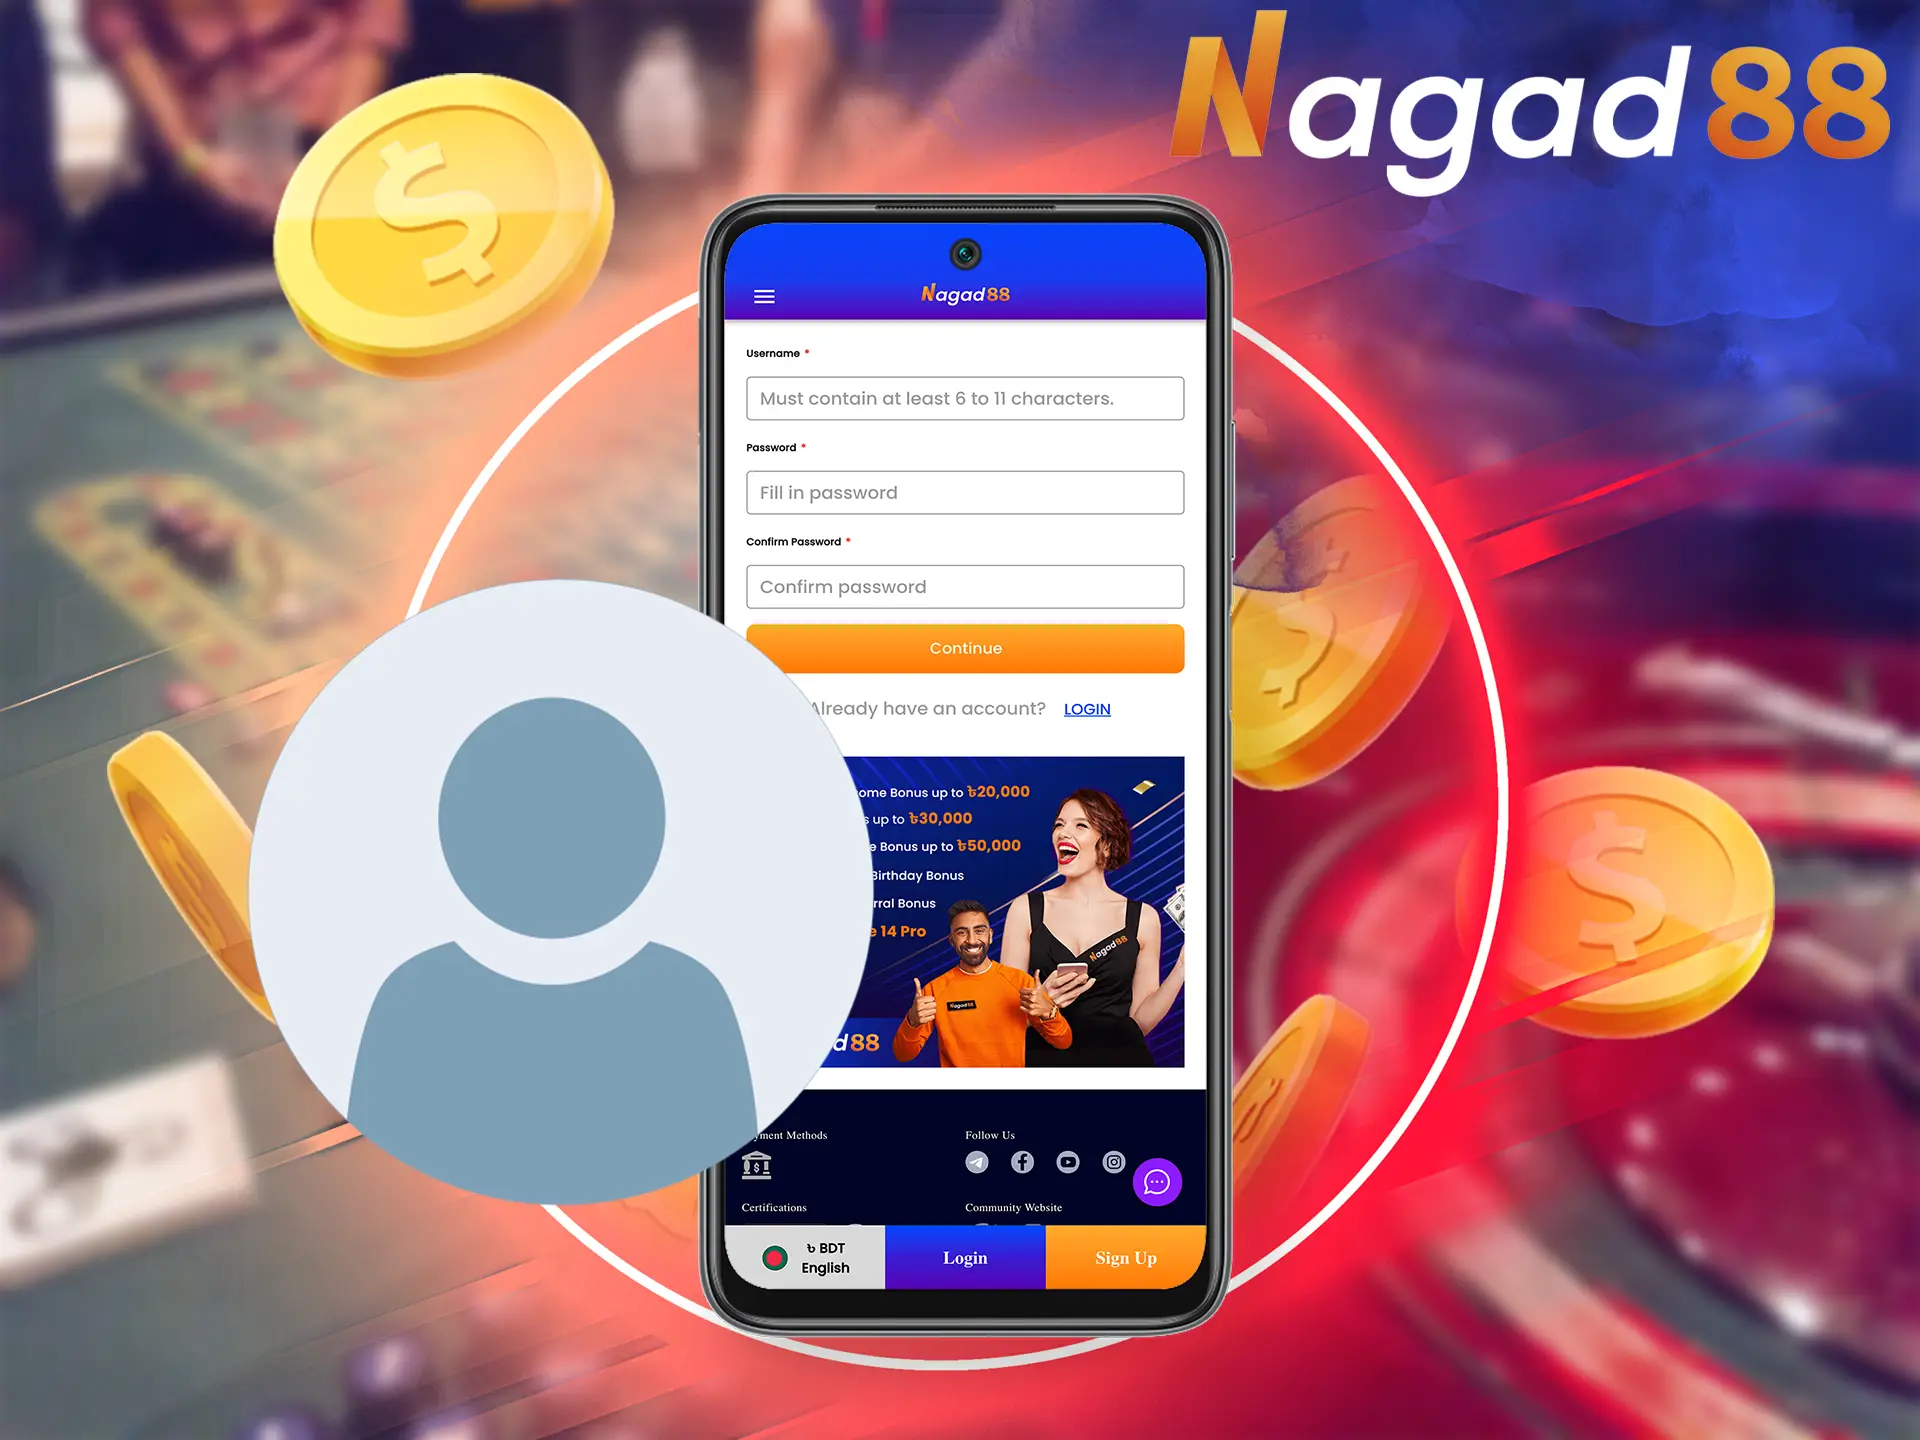 Learn how to create an account and start earning real money from betting and casino on the Nagad88 platform.